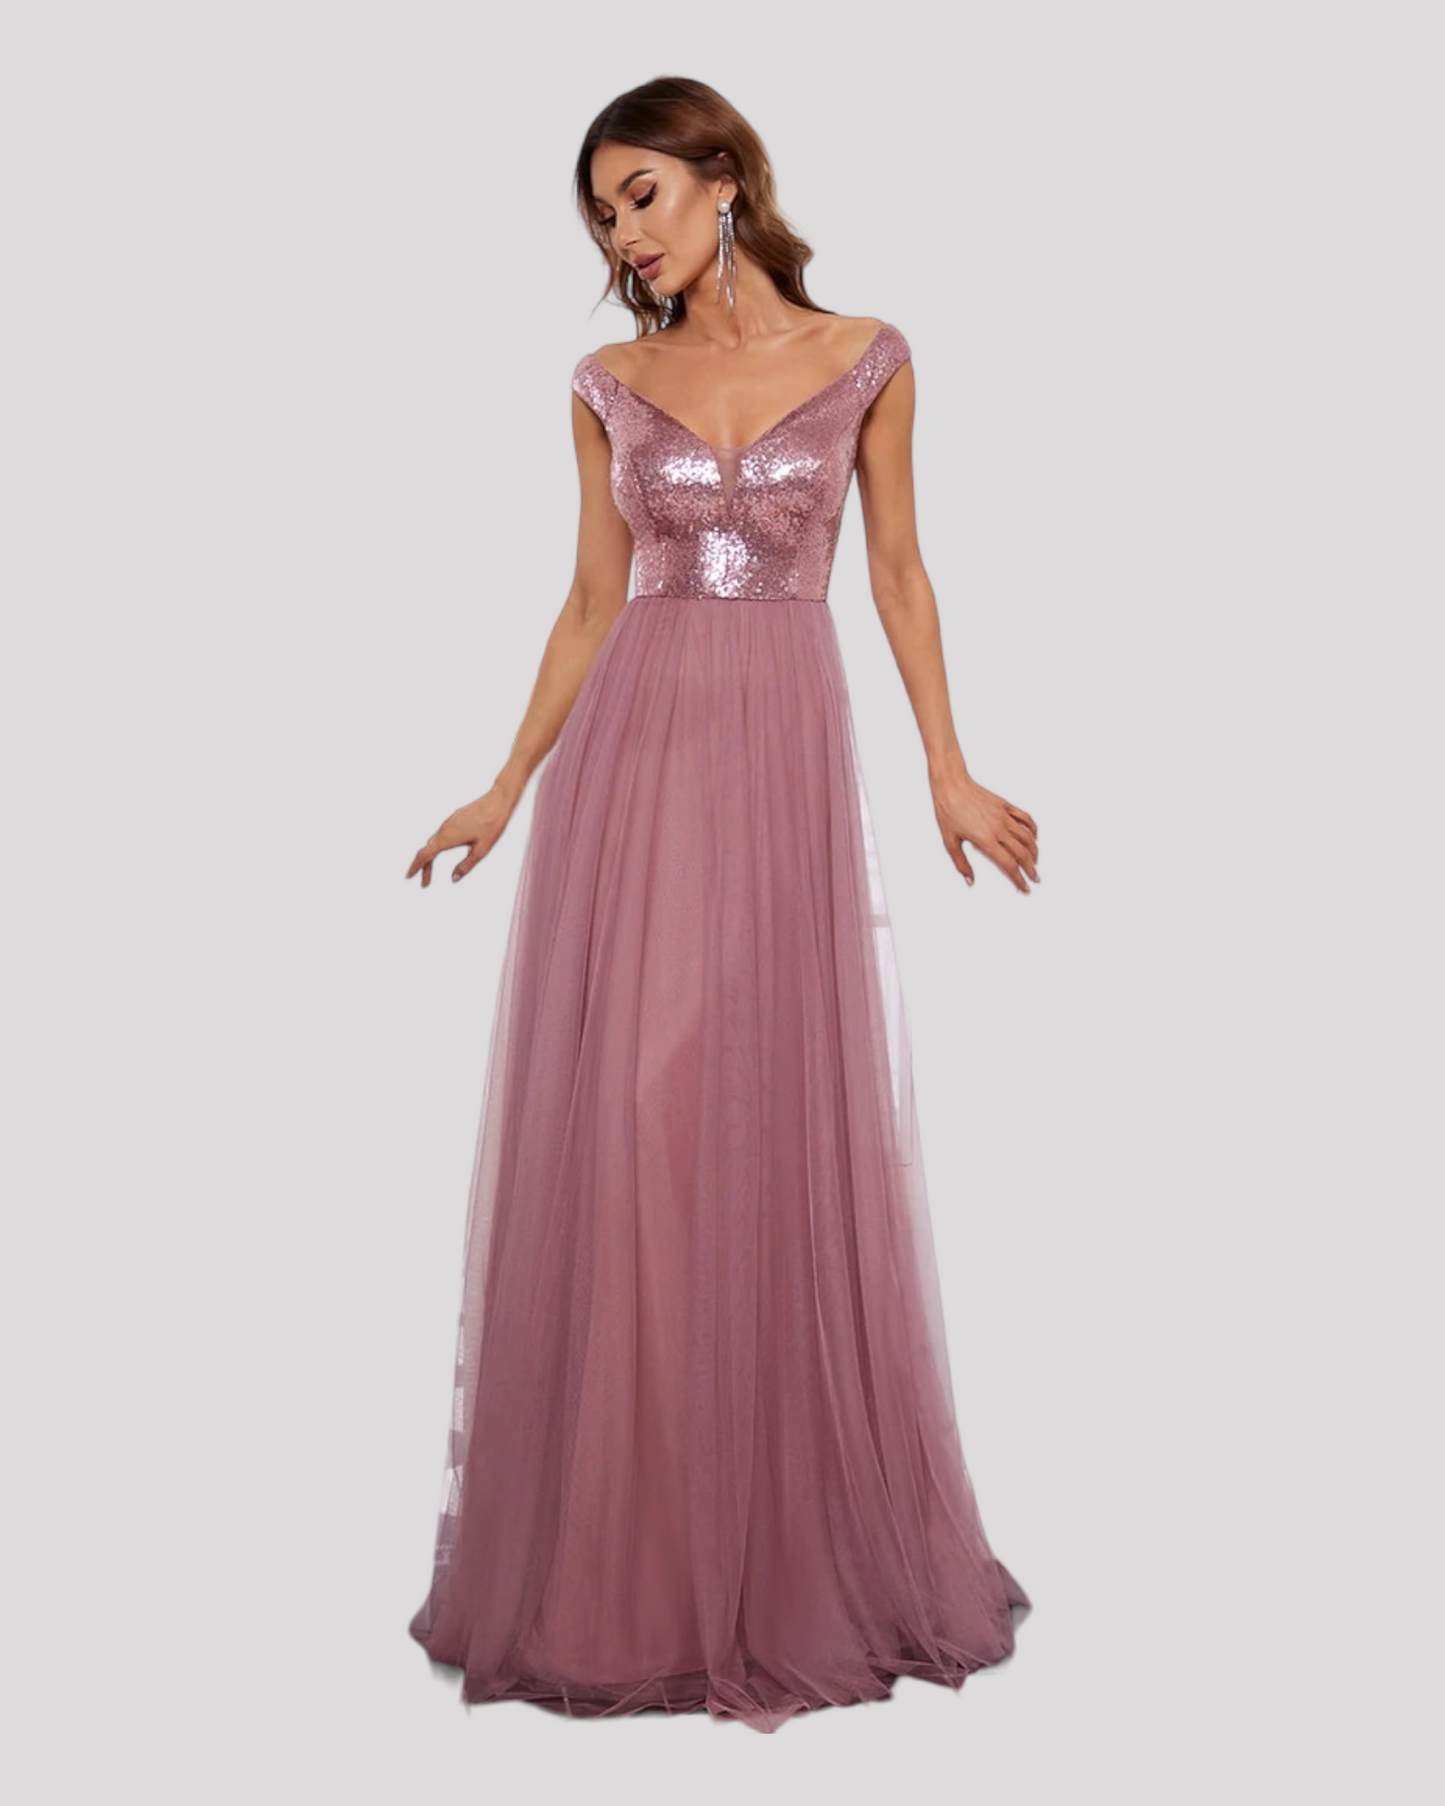 Elegant Sequin Bodice and Soft Tulle Evening Dress with V Neckline available in 7 Colours